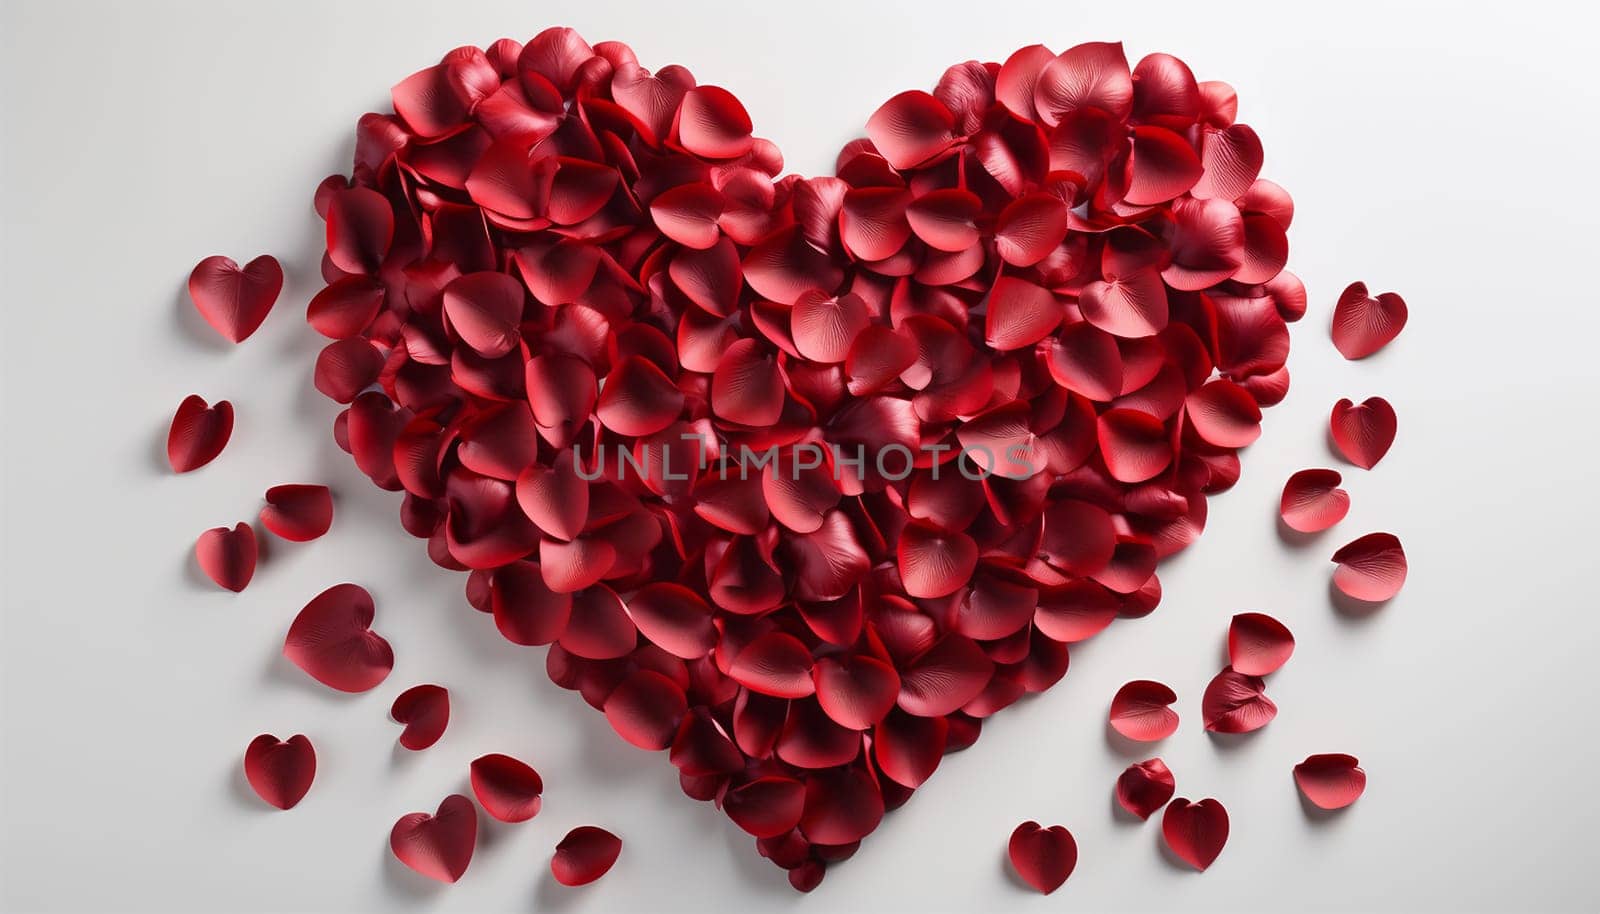 Romantic Valentine background, pink,red rose petals. Valentines Day Heart Made of Red Roses Isolated on White Background. Copy space